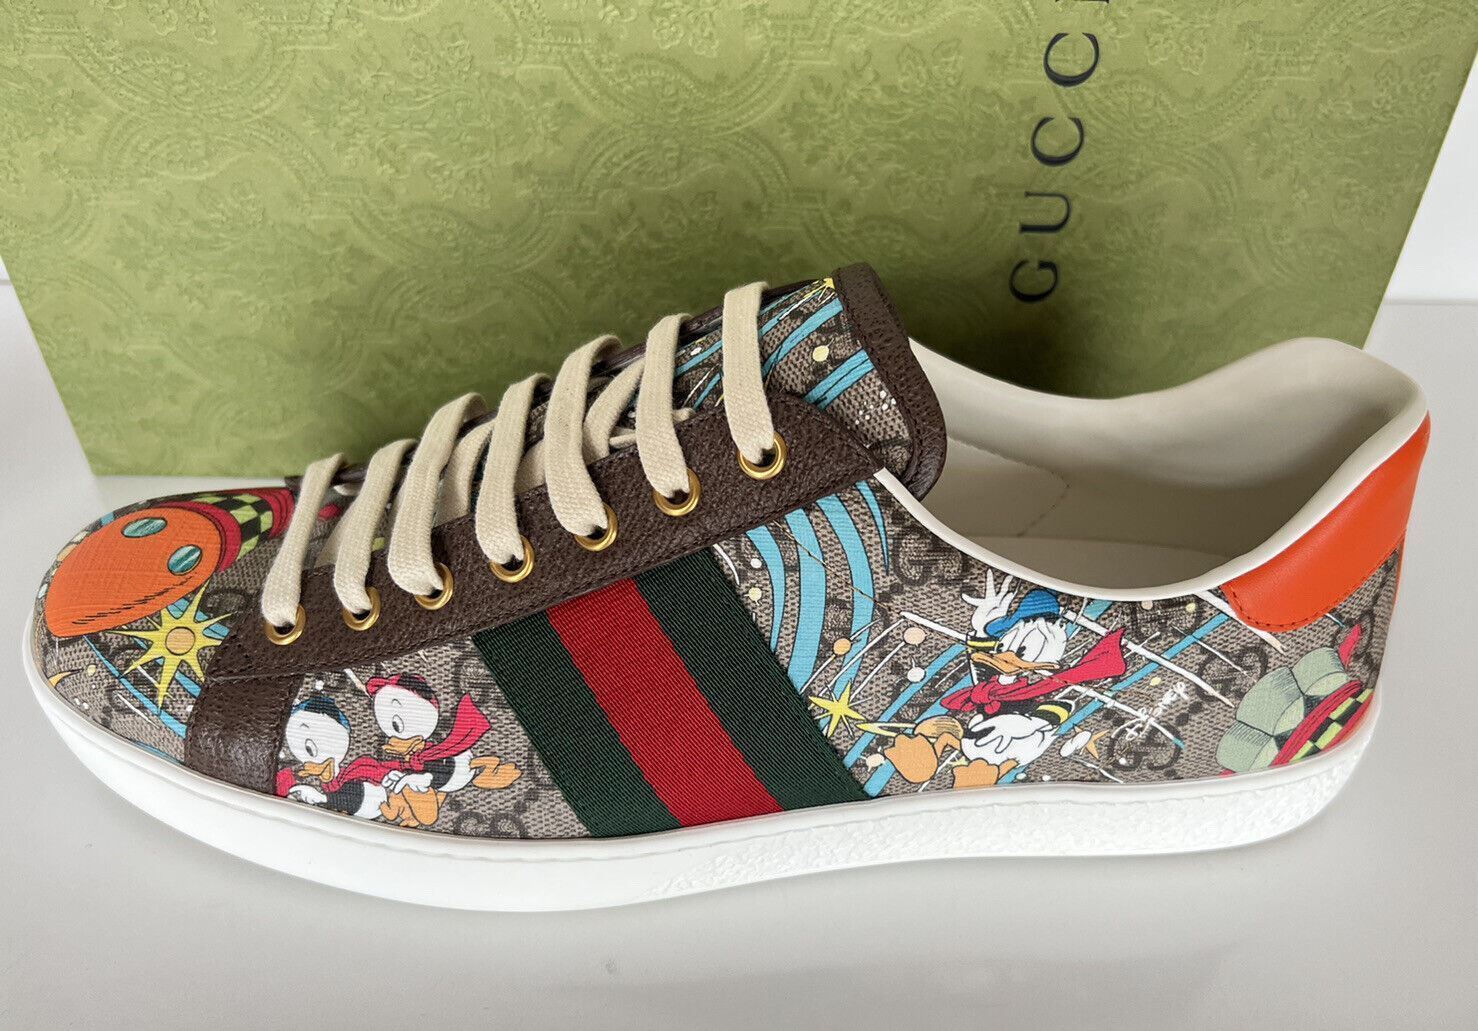 NIB Gucci Men’s Donald Duck Sneakers 14.5 US (Gucci 14) Made in Italy 647950